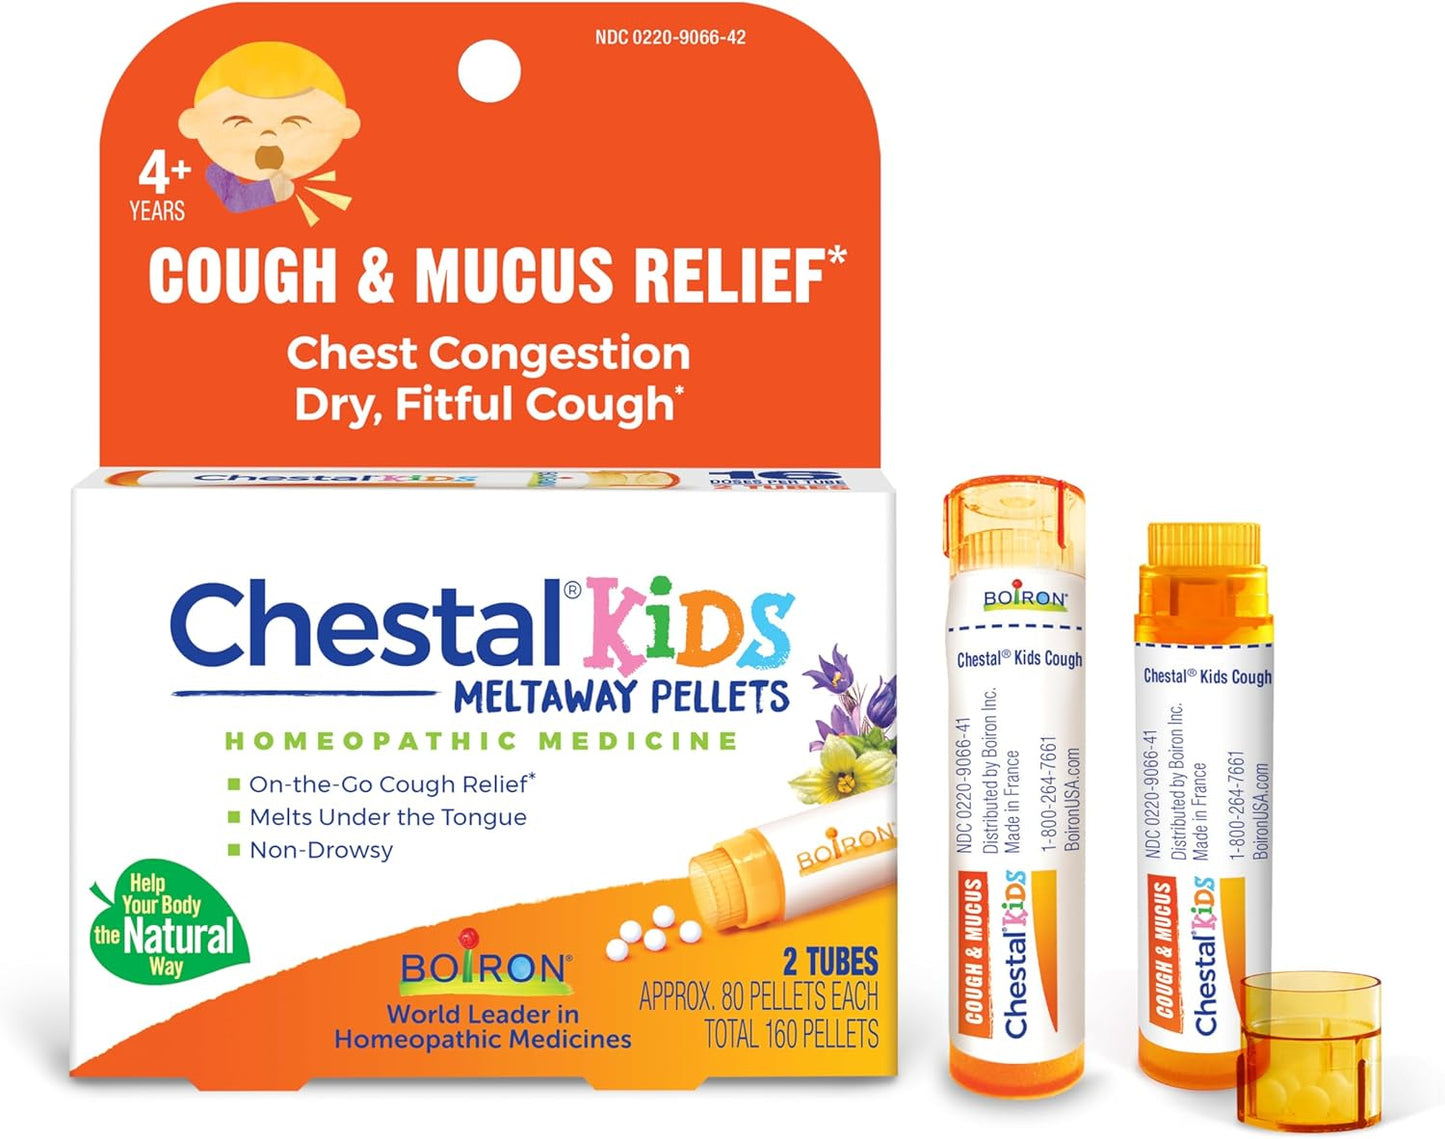 Boiron Chestal Kids Pellets for Cough and Mucus Relief - 2 Count (160 Pellets)